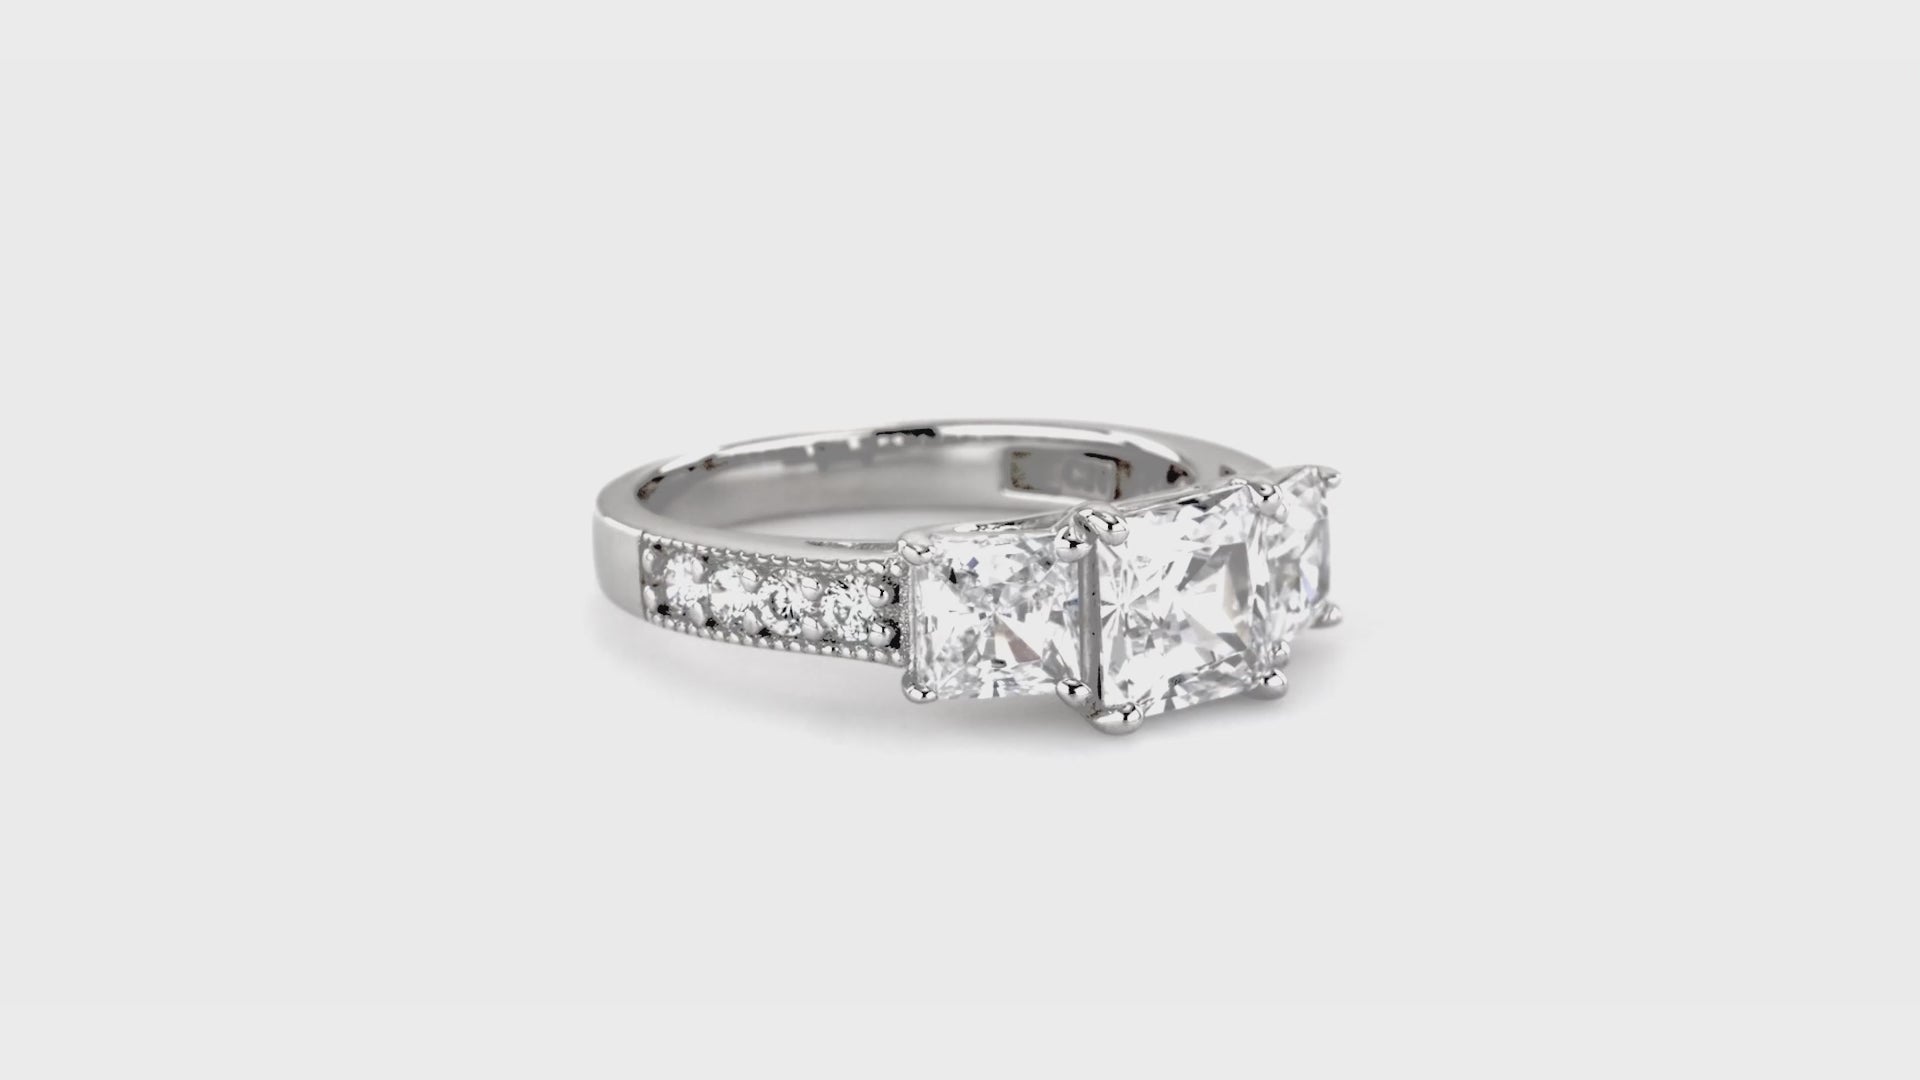 Video Contains 3-Stone Princess CZ Ring Set in Sterling Silver. Style Number R776